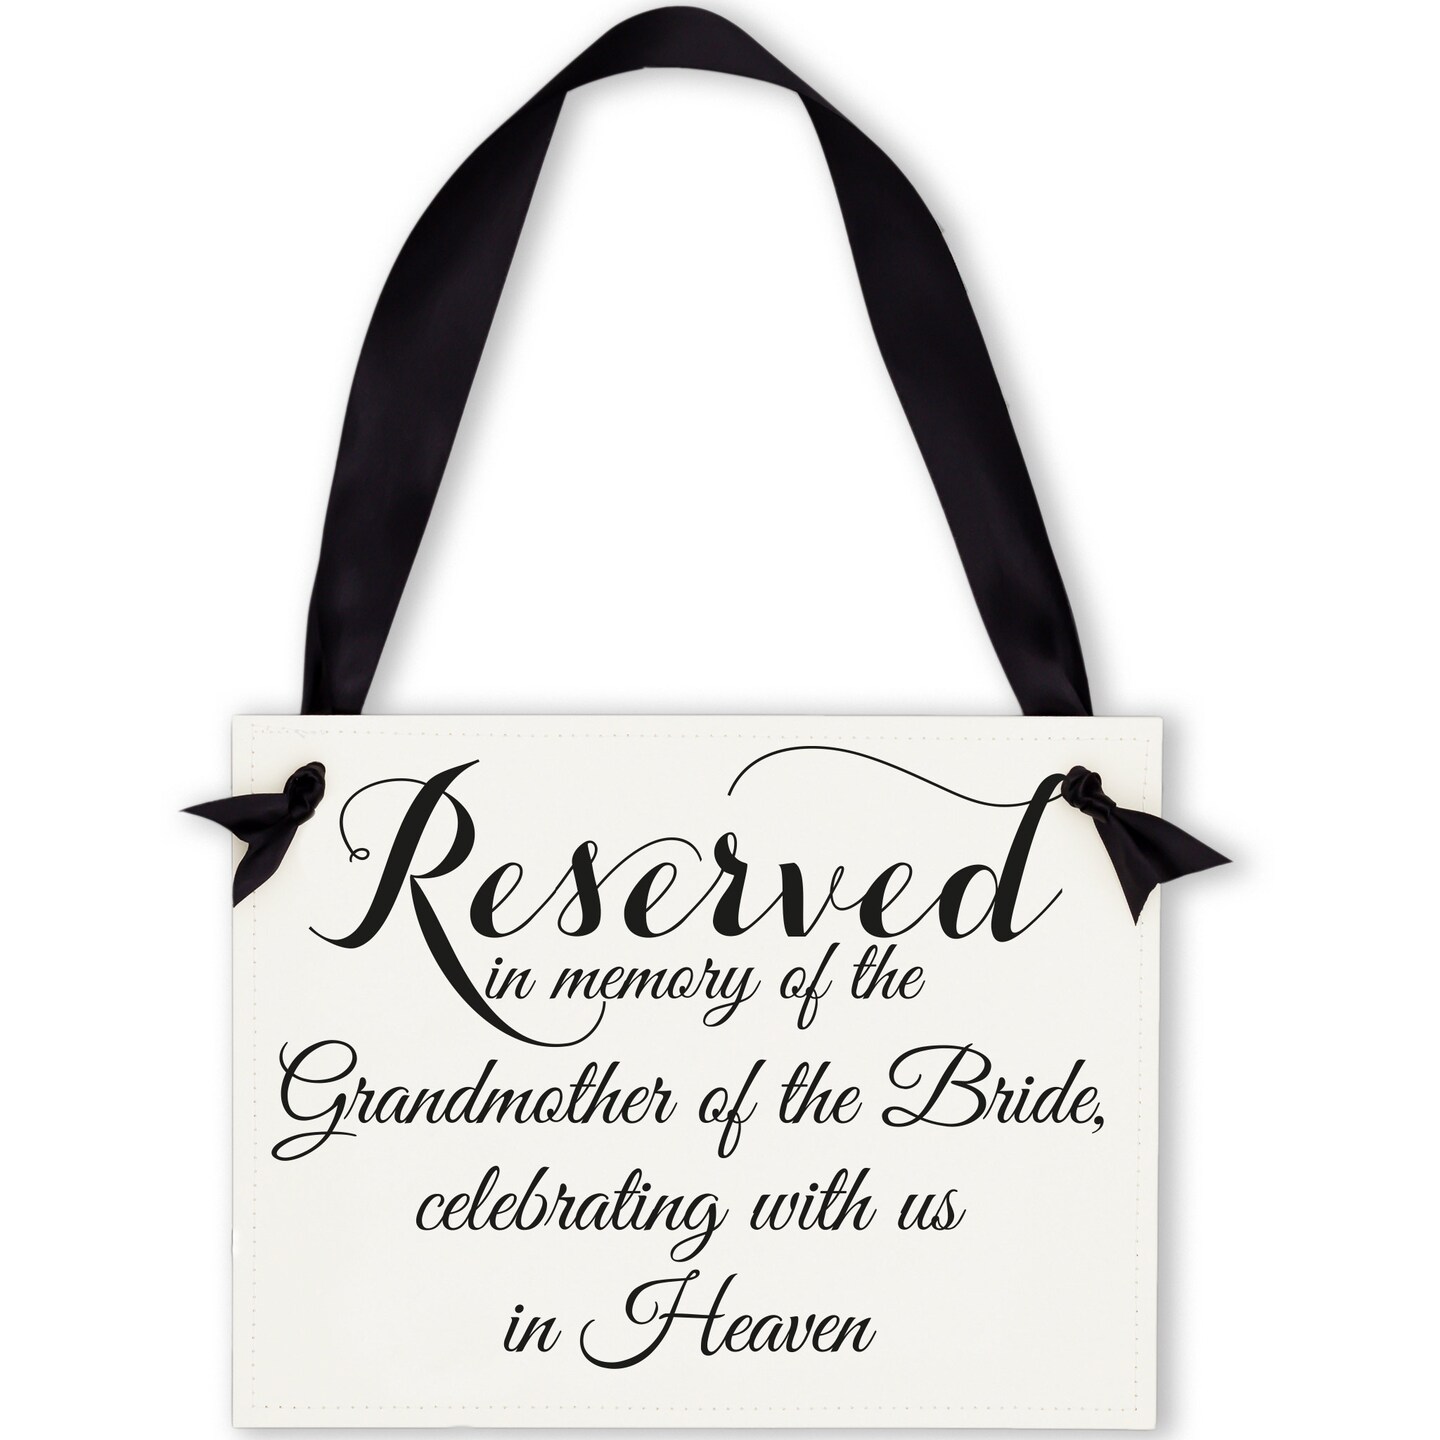 Ritzy Rose Grandmother of the Bride Memorial Sign - Black on 11x8in White Linen Cardstock with Black Ribbon